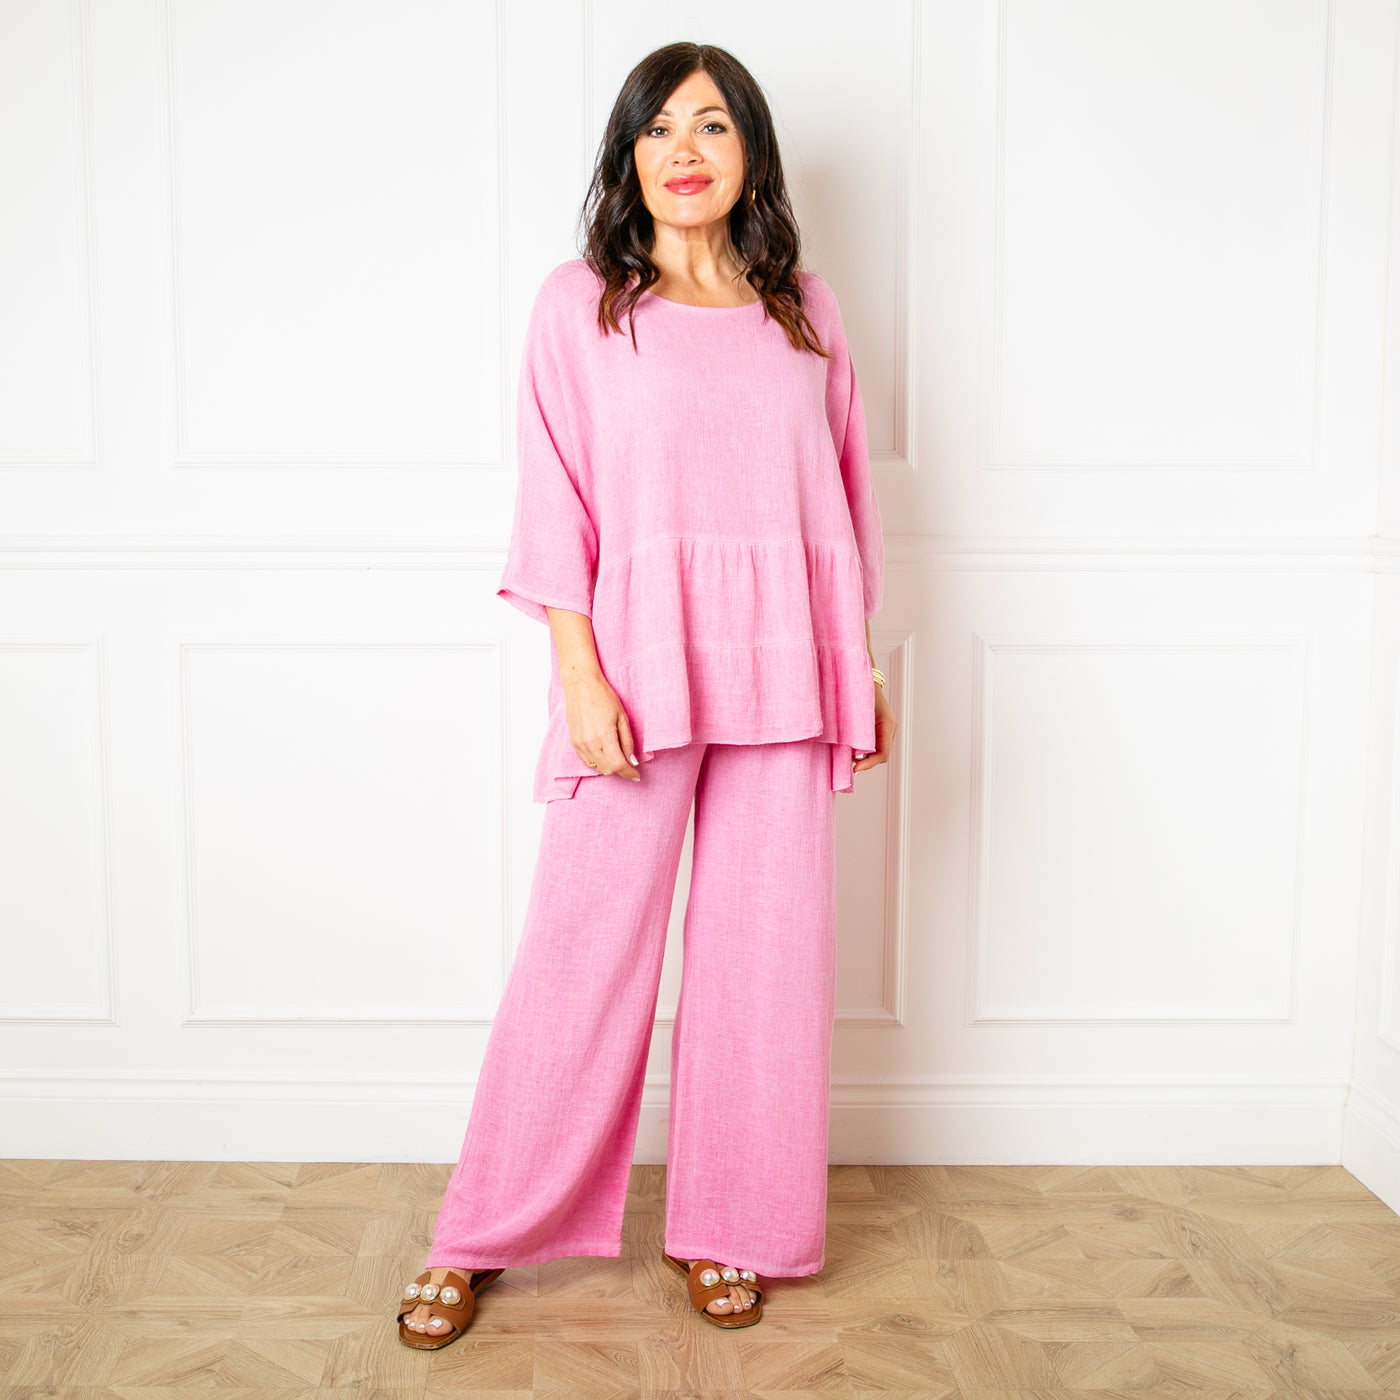 The candy pink Linen Blend Tiered Top made from a mix of cotton and linen for a lightweight relaxed summer look